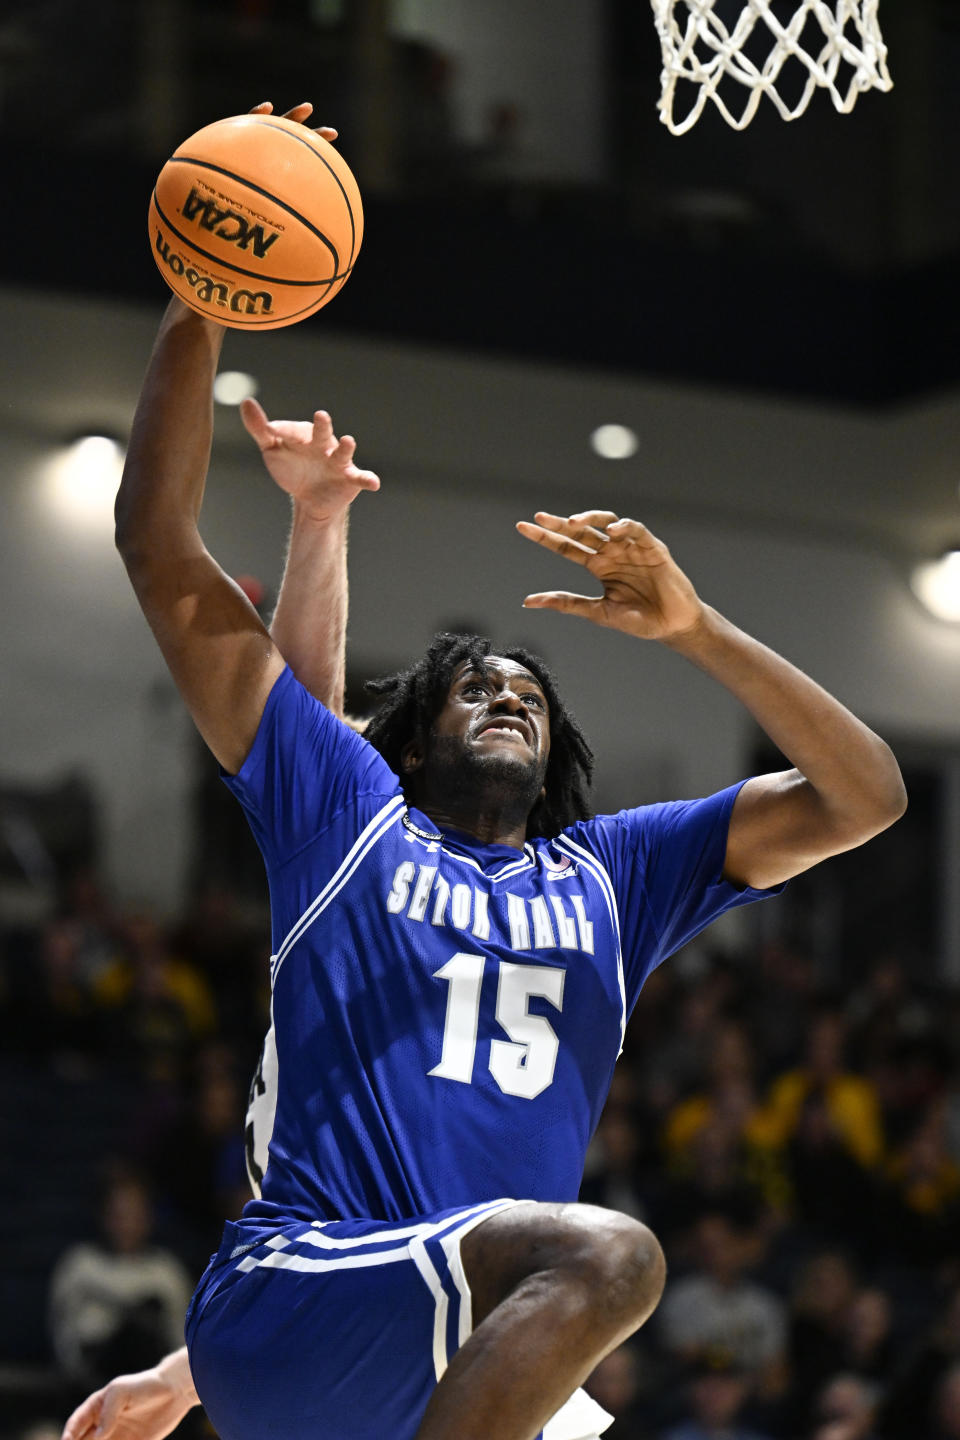 Seton Hall center Jaden Bediako (15) goes up to dunk during the second half of the team's NCAA college basketball game against Iowa Friday, Nov. 24, 2023, in San Diego. (AP Photo/Denis Poroy)